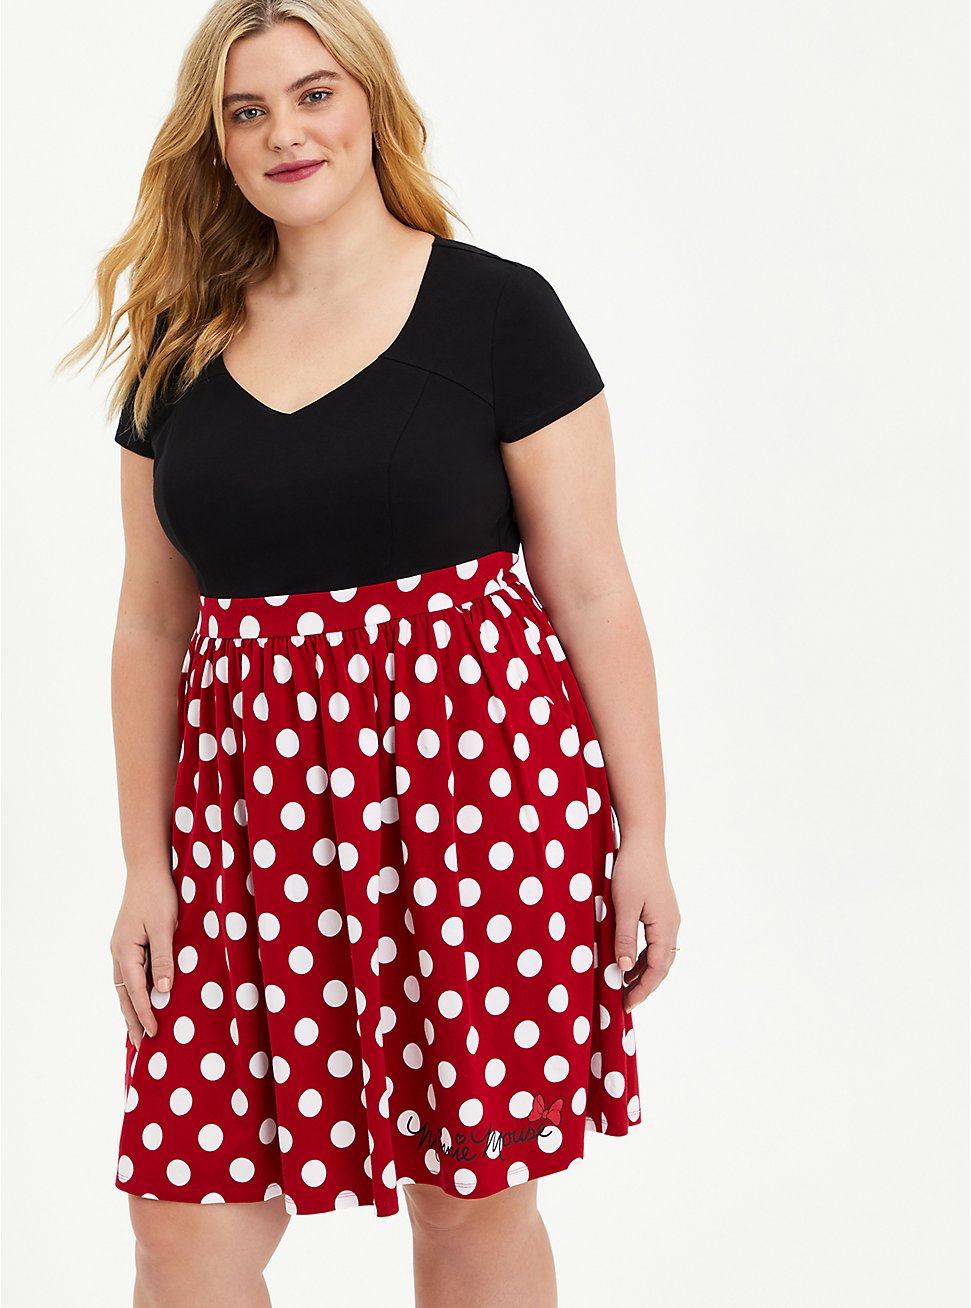 Plus Size Minnie Mouse skirt